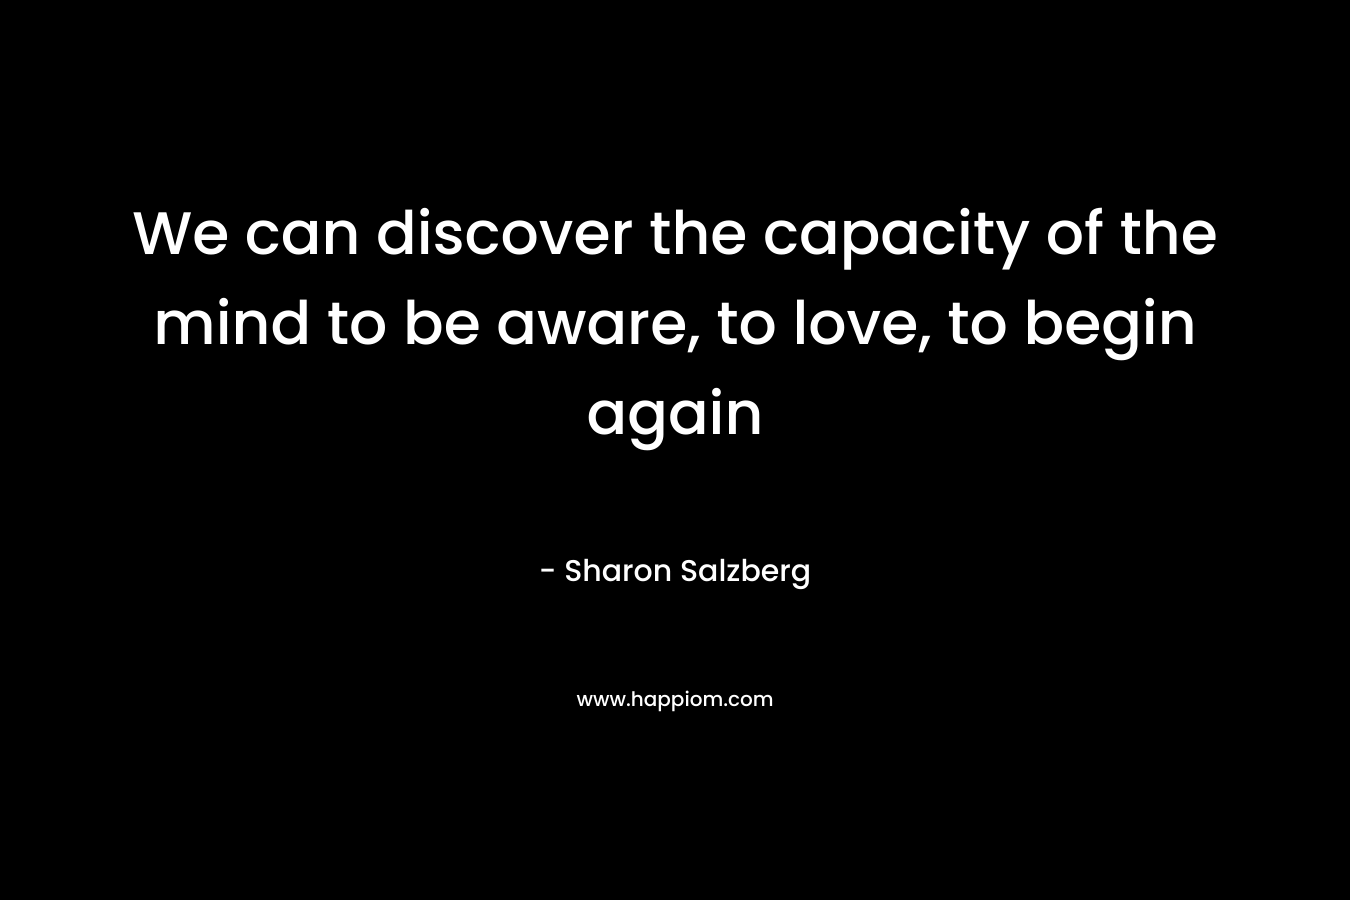 We can discover the capacity of the mind to be aware, to love, to begin again